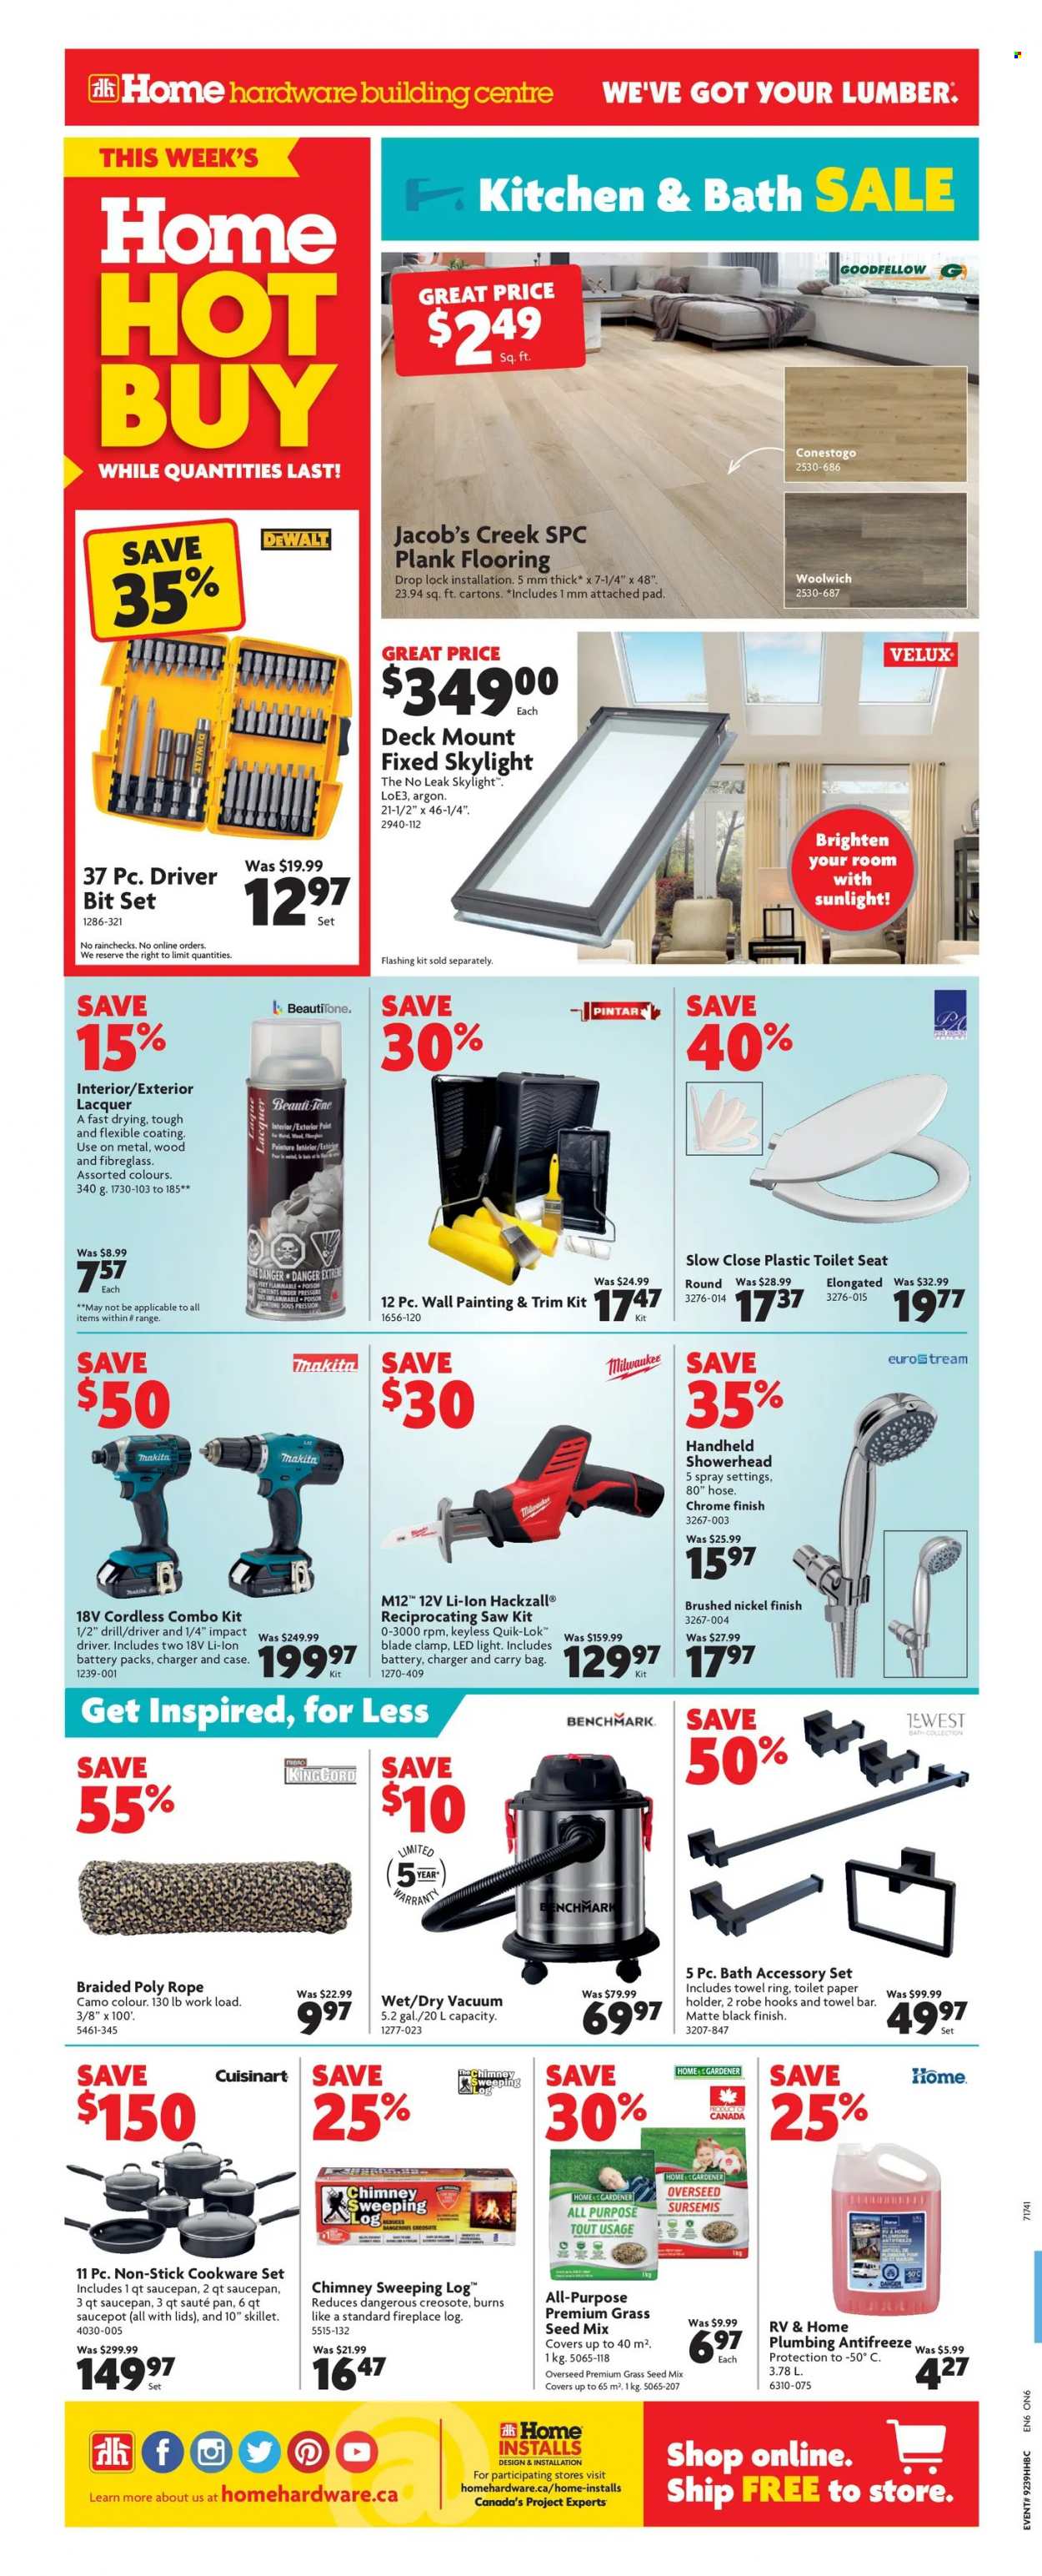 thumbnail - Home Hardware Building Centre Flyer - September 30, 2021 - October 06, 2021 - Sales products - toilet paper, Cuisinart, vacuum cleaner, toilet seat, showerhead, LED light, holder, fireplace, flooring, Milwaukee, cordless combo kit, DeWALT, drill, saw, reciprocating saw, combo kit, plant seeds, grass seed, antifreeze. Page 2.